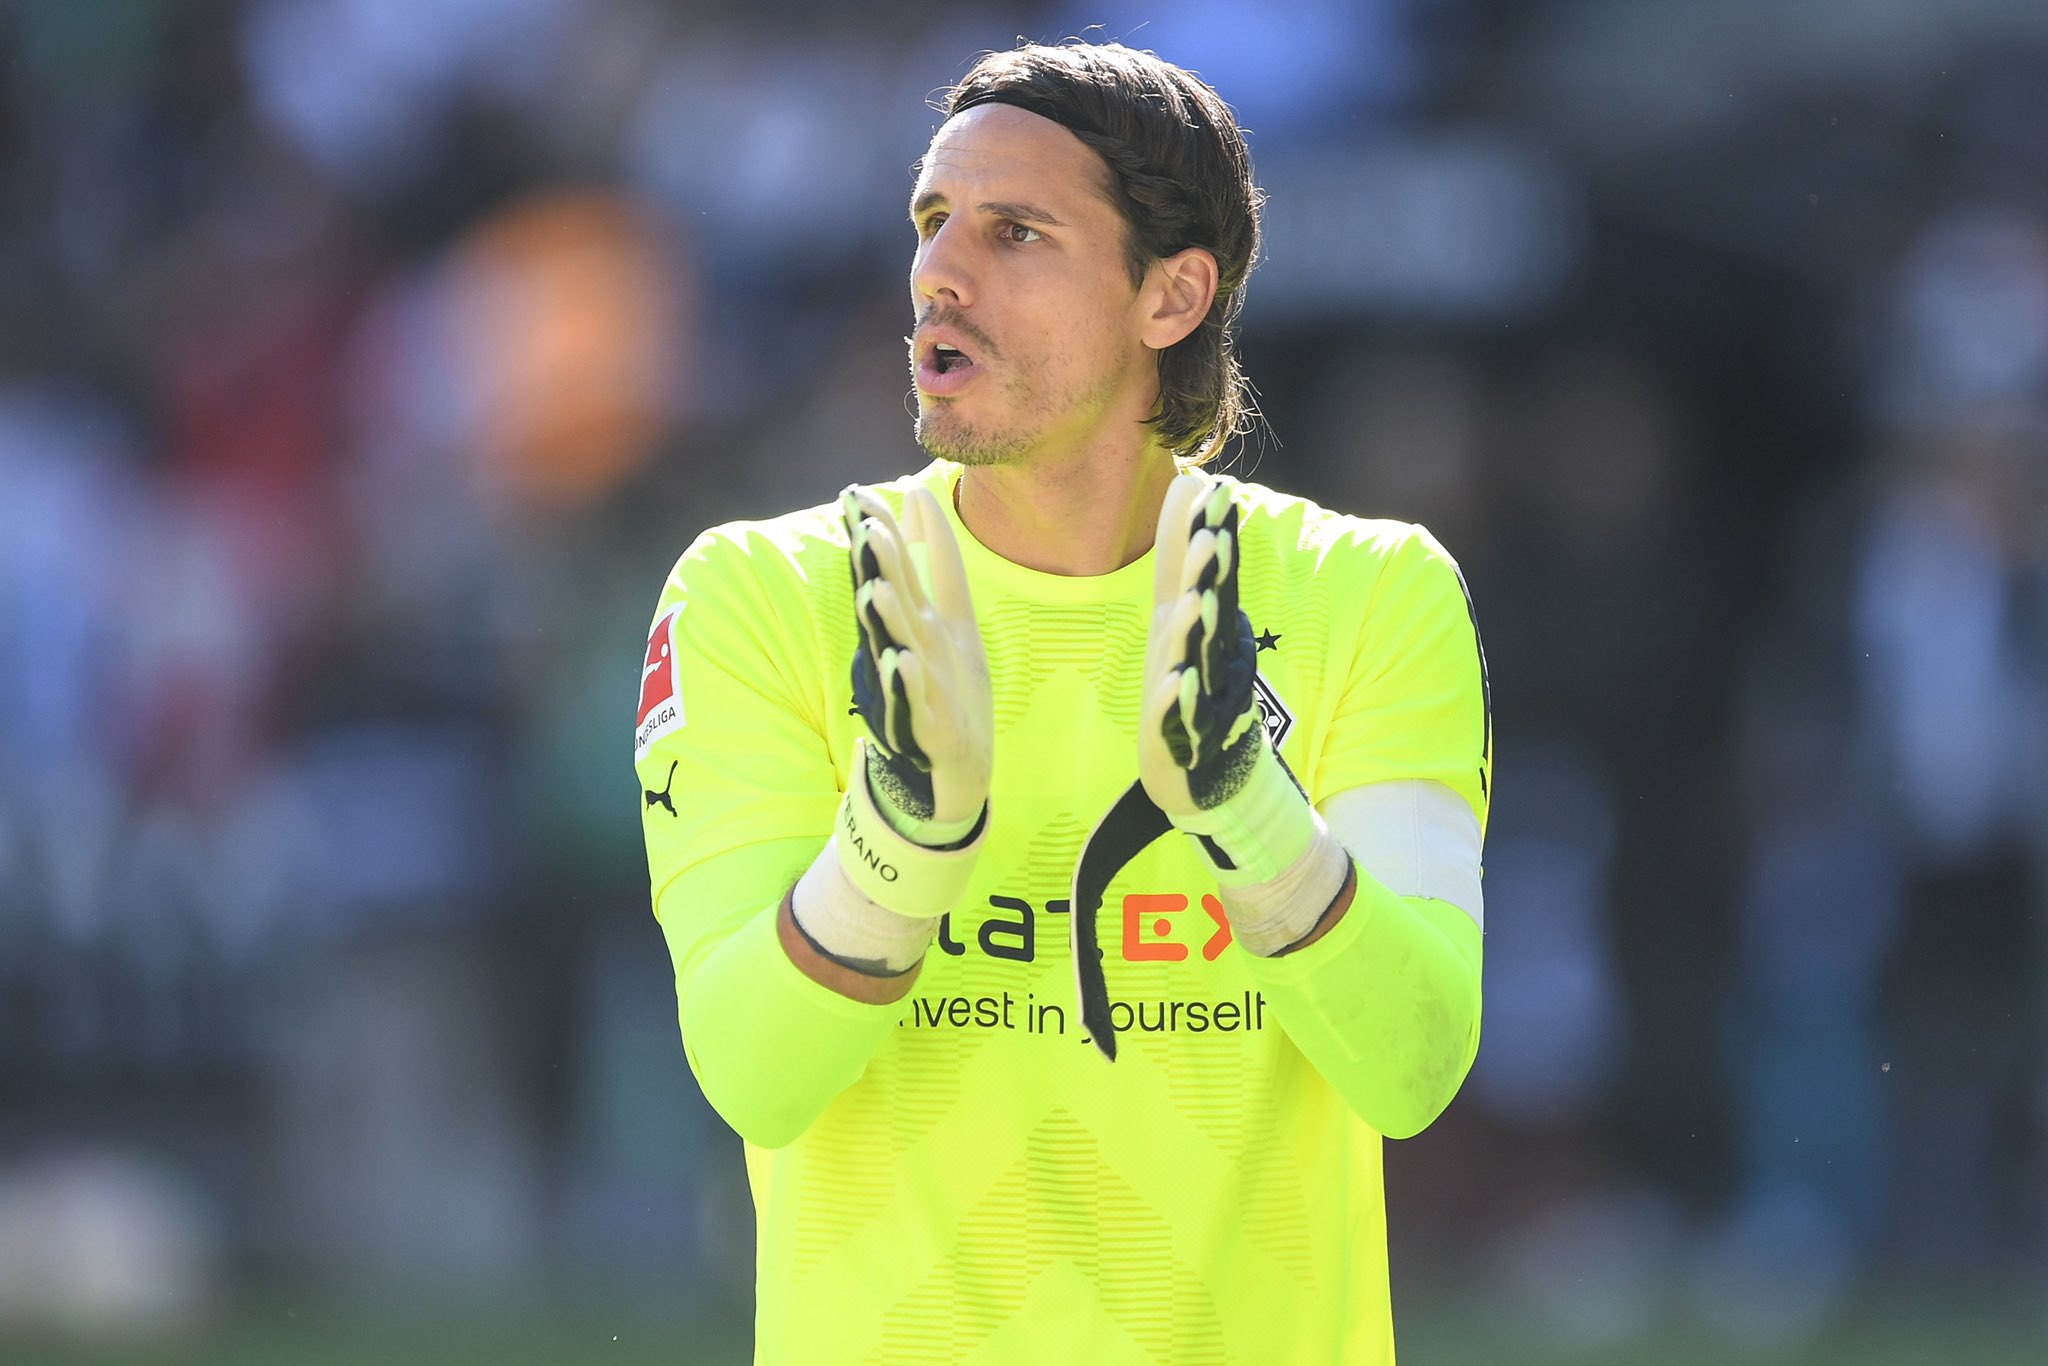 WATCH | Yann Sommer stuns the interweb with catalogue of world class saves vs Bayern